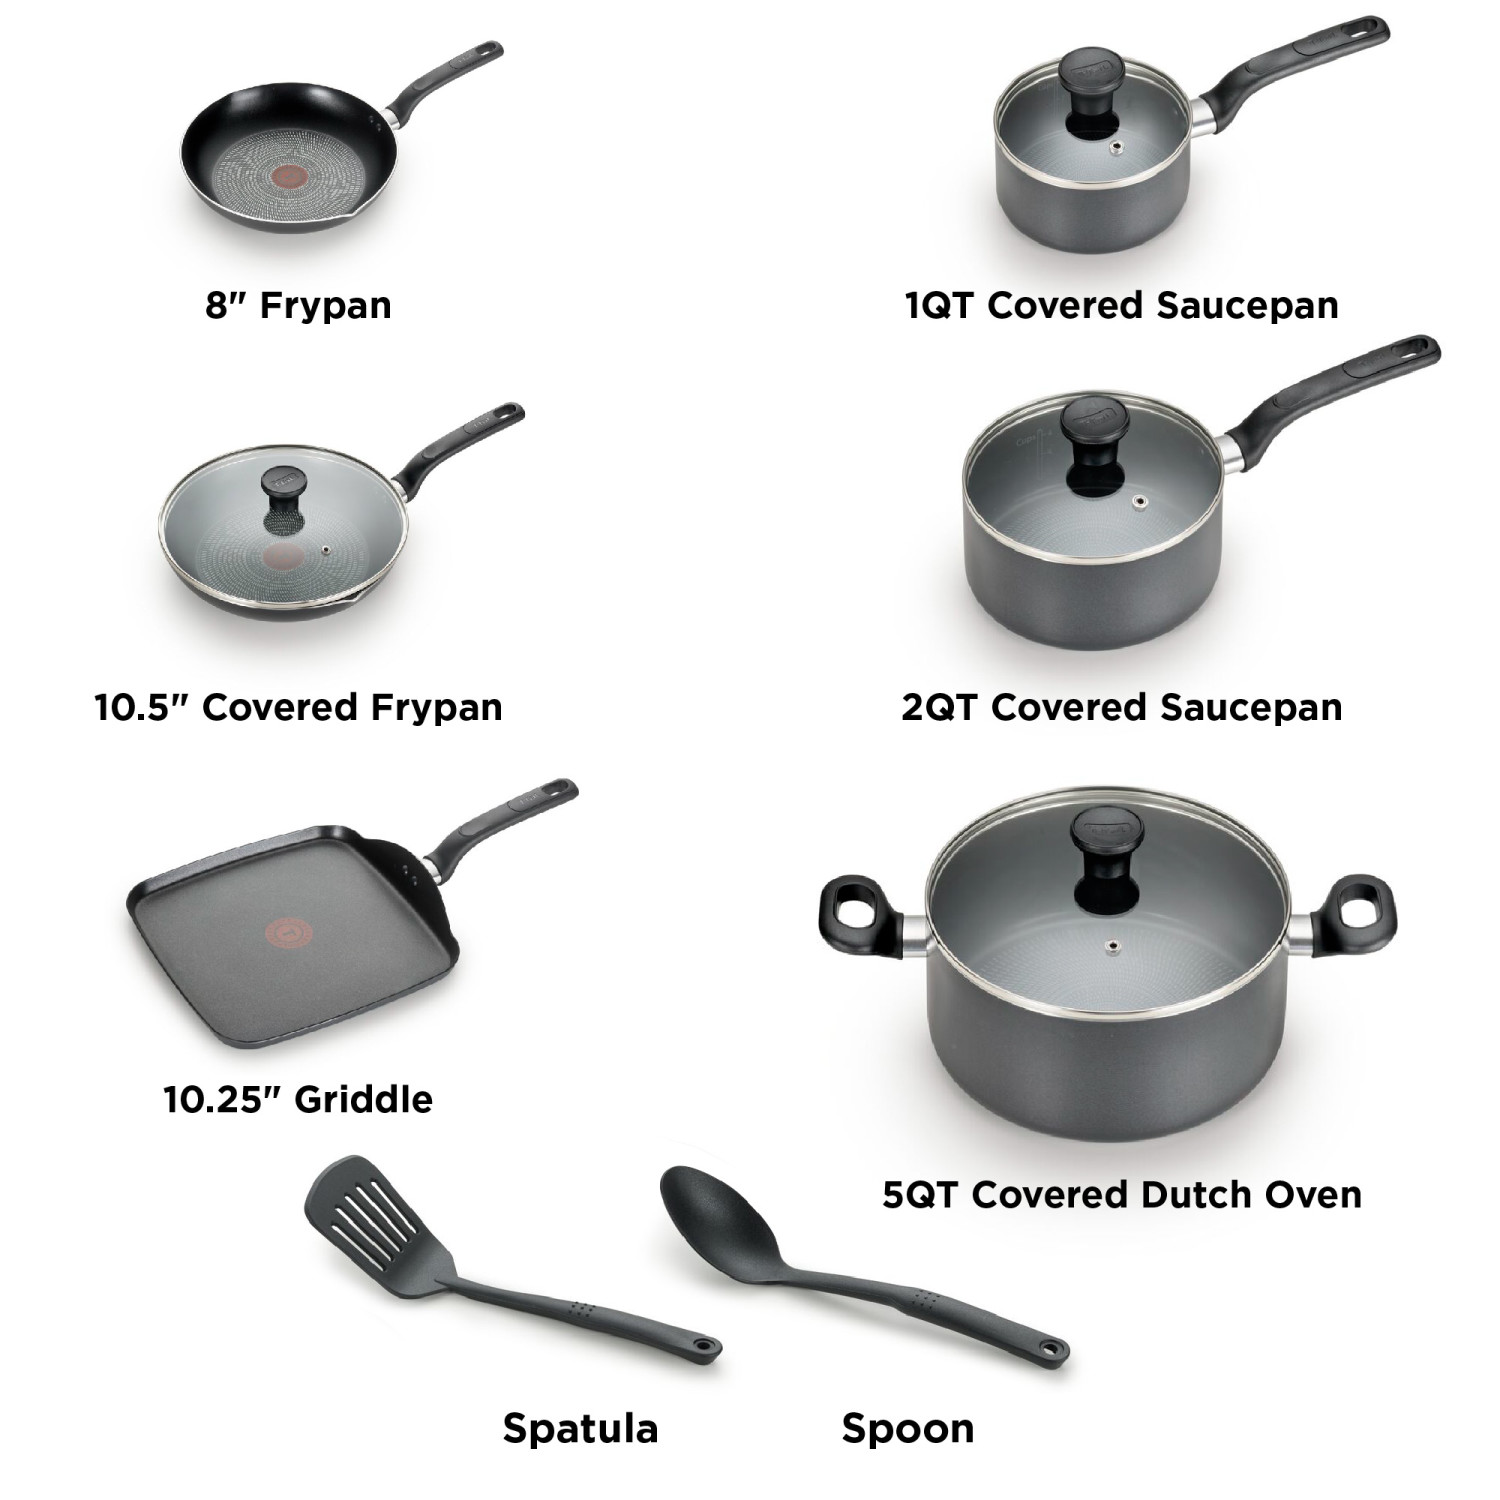 T-fal Easy Care 12-Piece Non-Stick Cookware Set, Pots and Pans, Grey - image 3 of 11